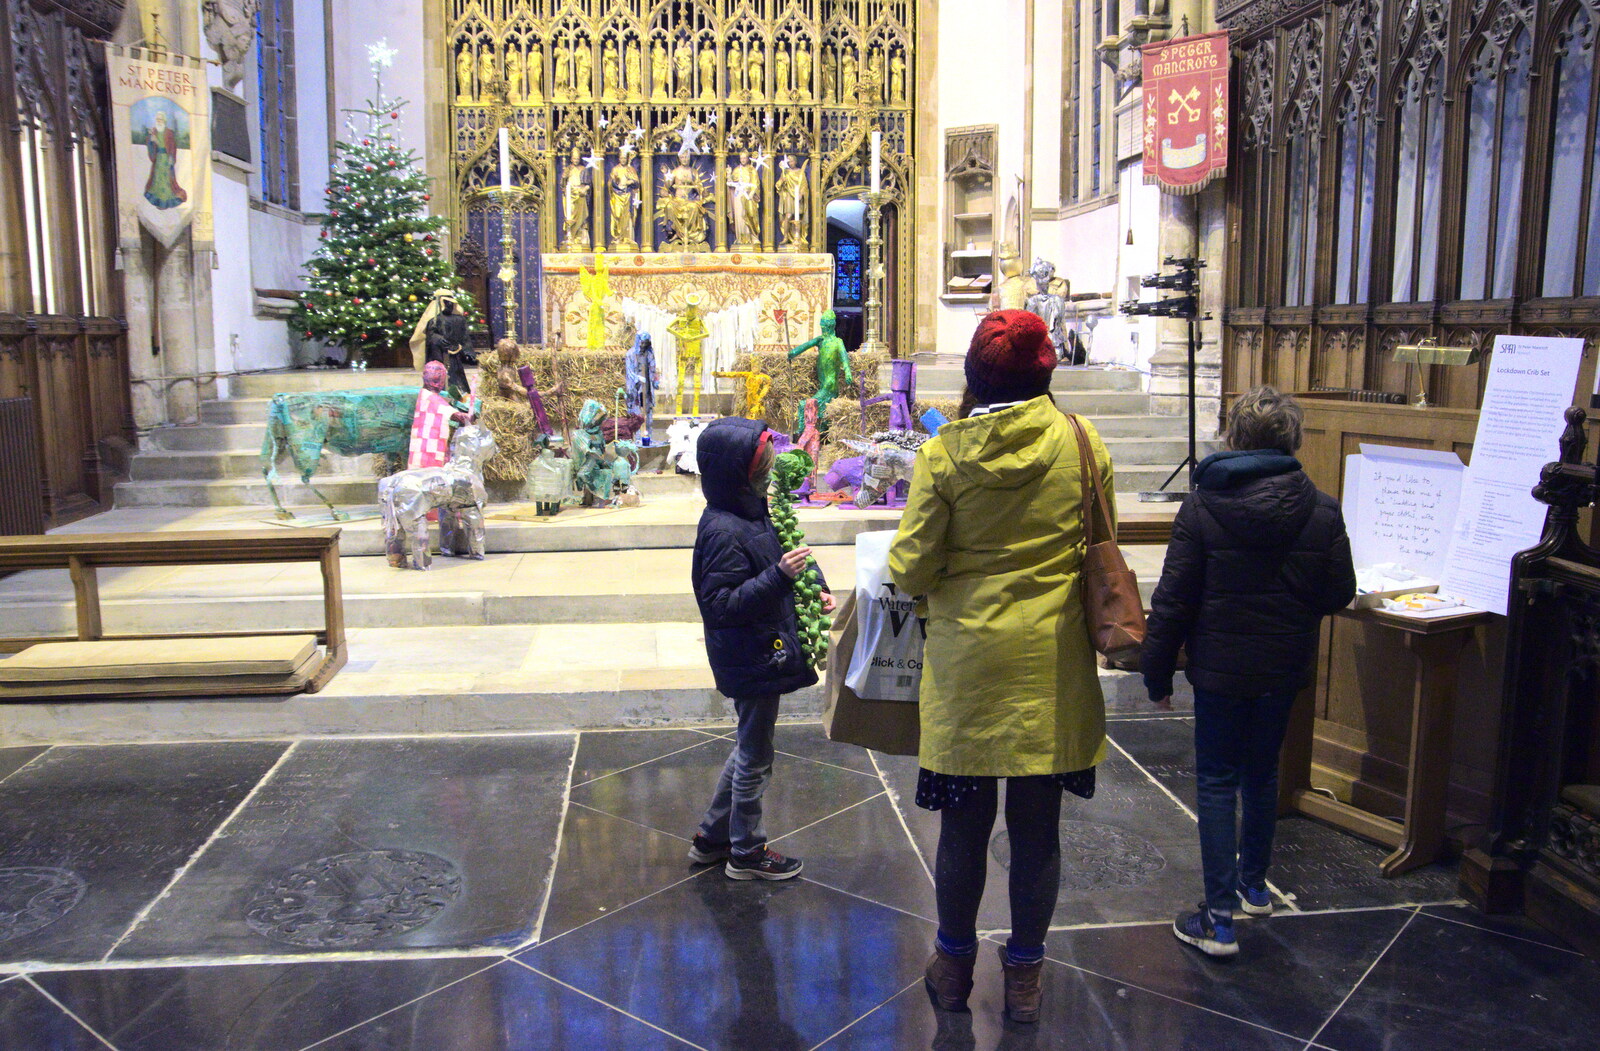 We head into St. Peter Mancroft from A Bit of Christmas Shopping, Norwich, Norfolk - 23rd December 2020